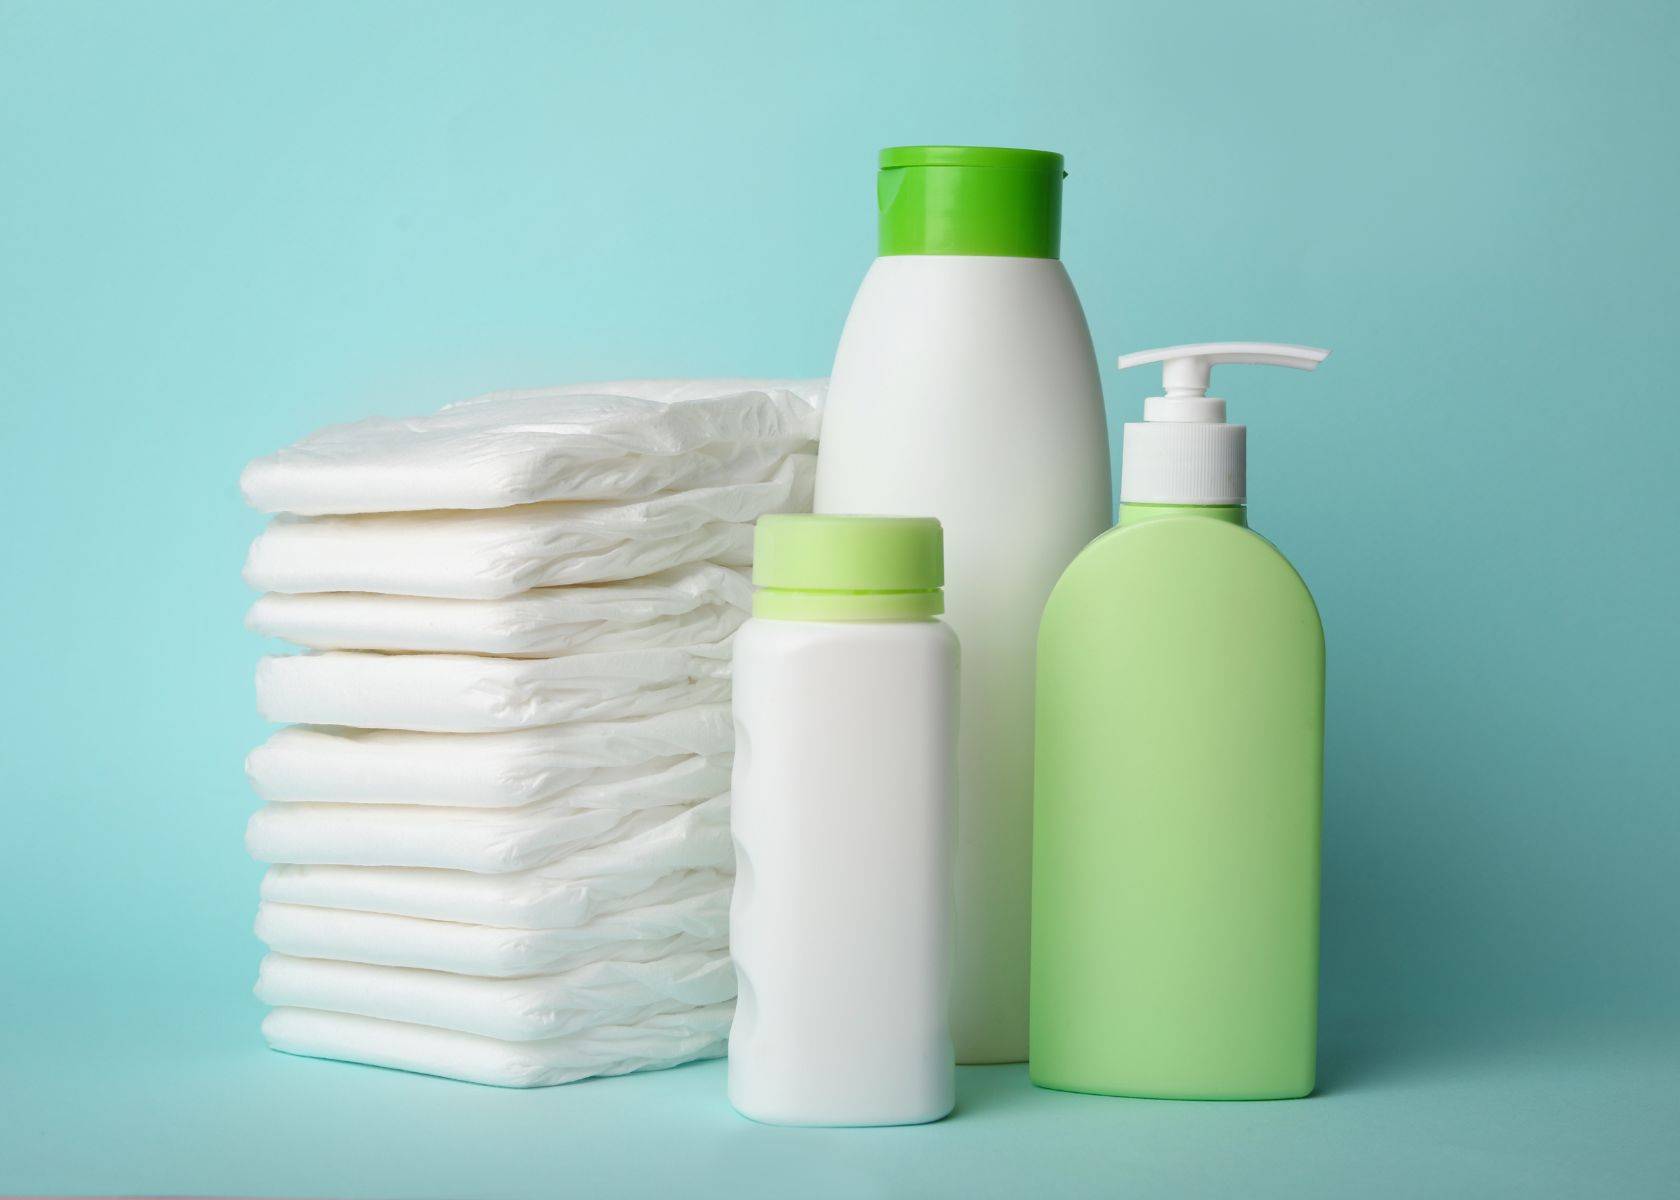 Is Baby Body Lotion Good For Face?